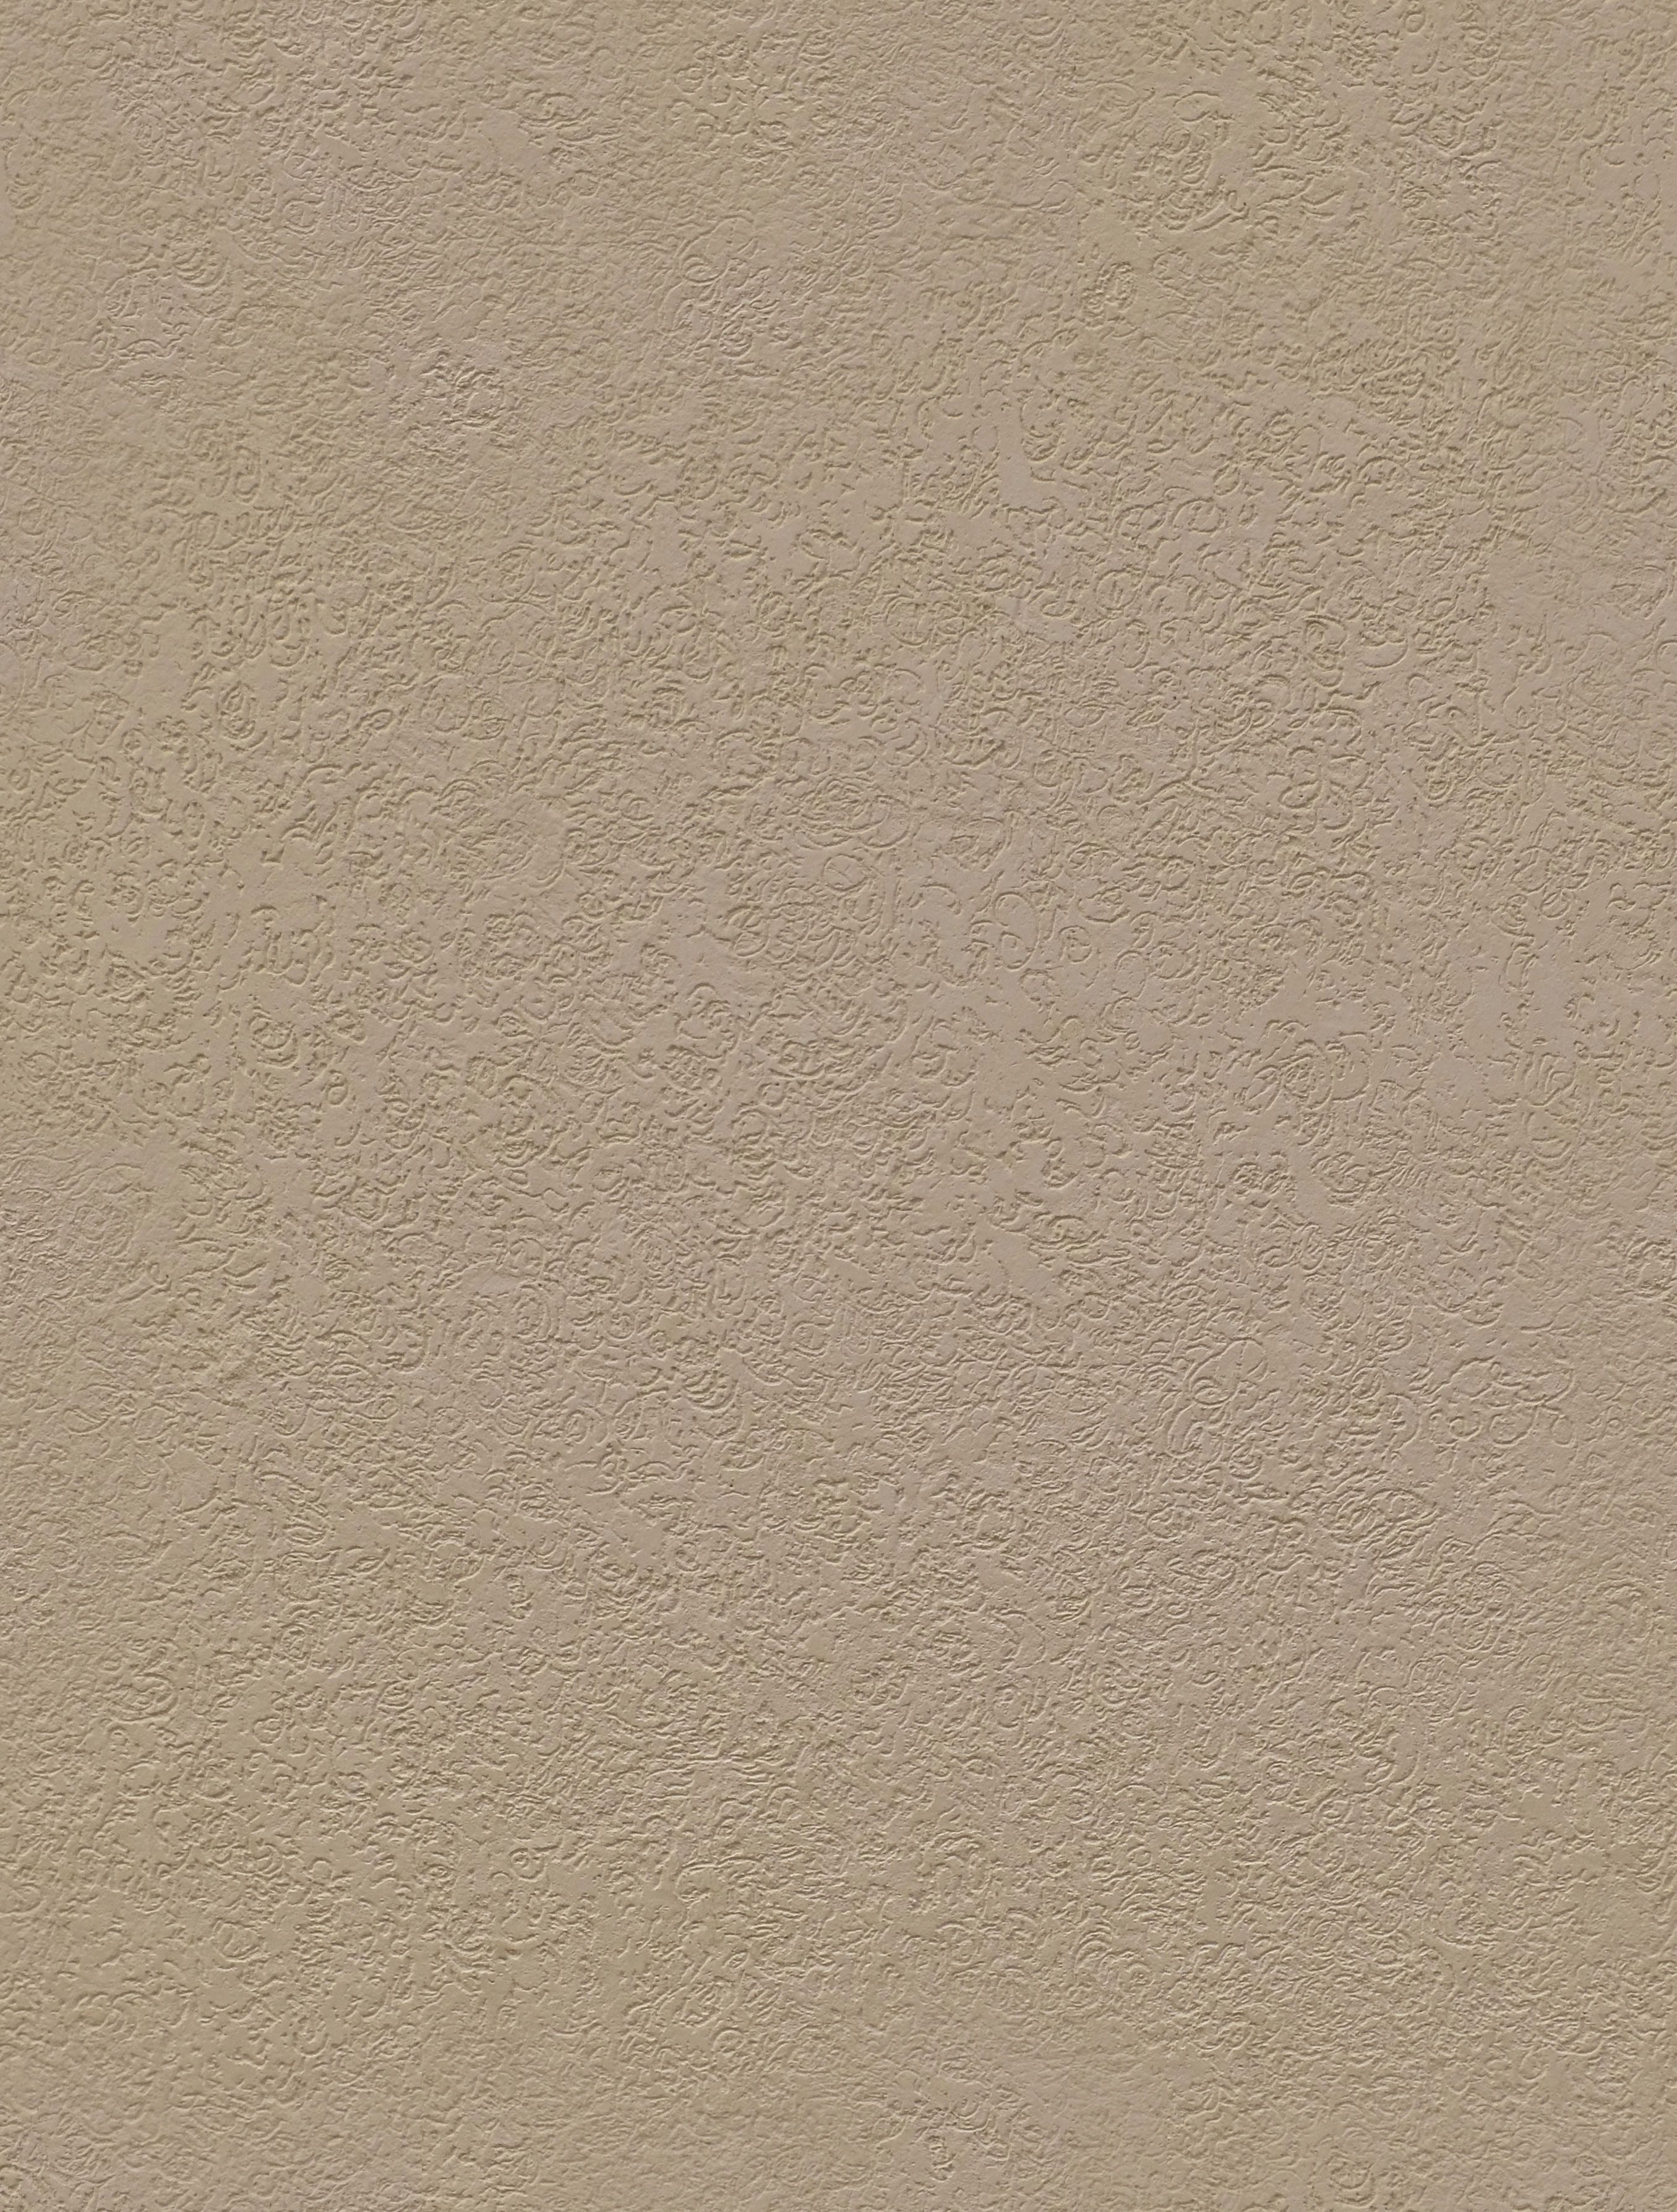 patterned stucco seamless texture | subtle, seamless textures ...